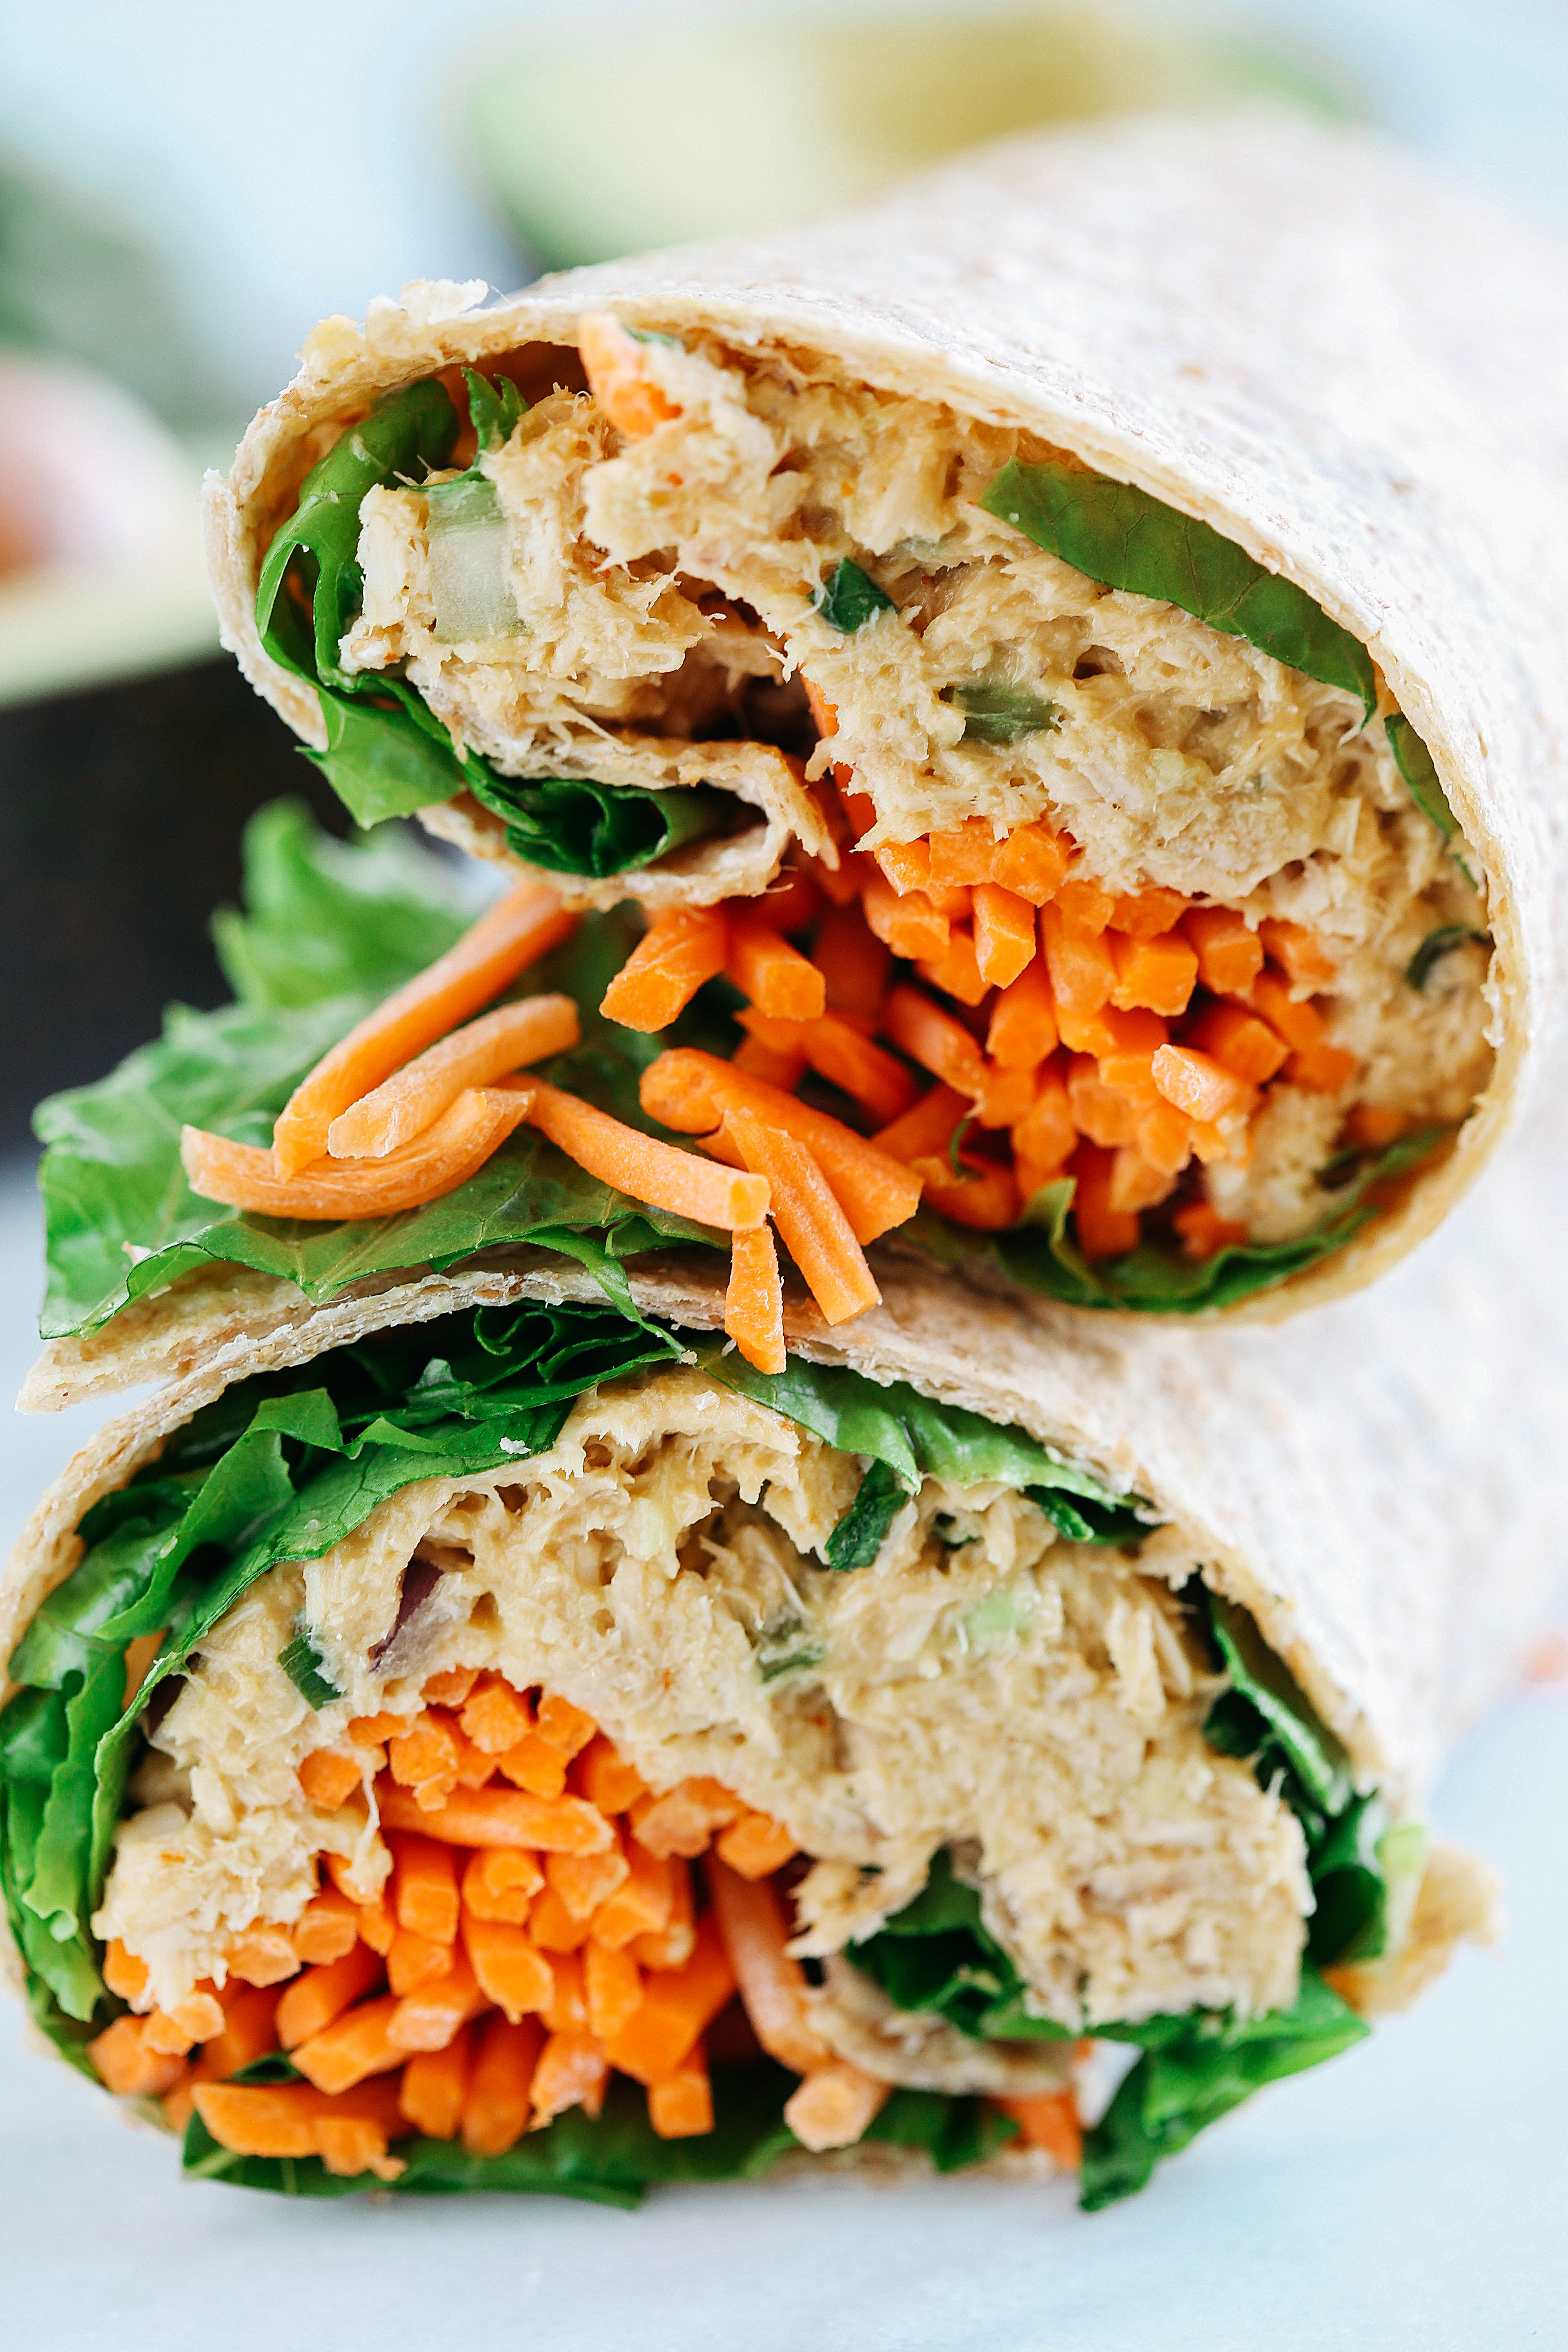 These Spicy Tuna Avocado Wraps are light and fresh, full of flavor and only take 5 minutes to make! The perfect healthy lunch for a busy work week!